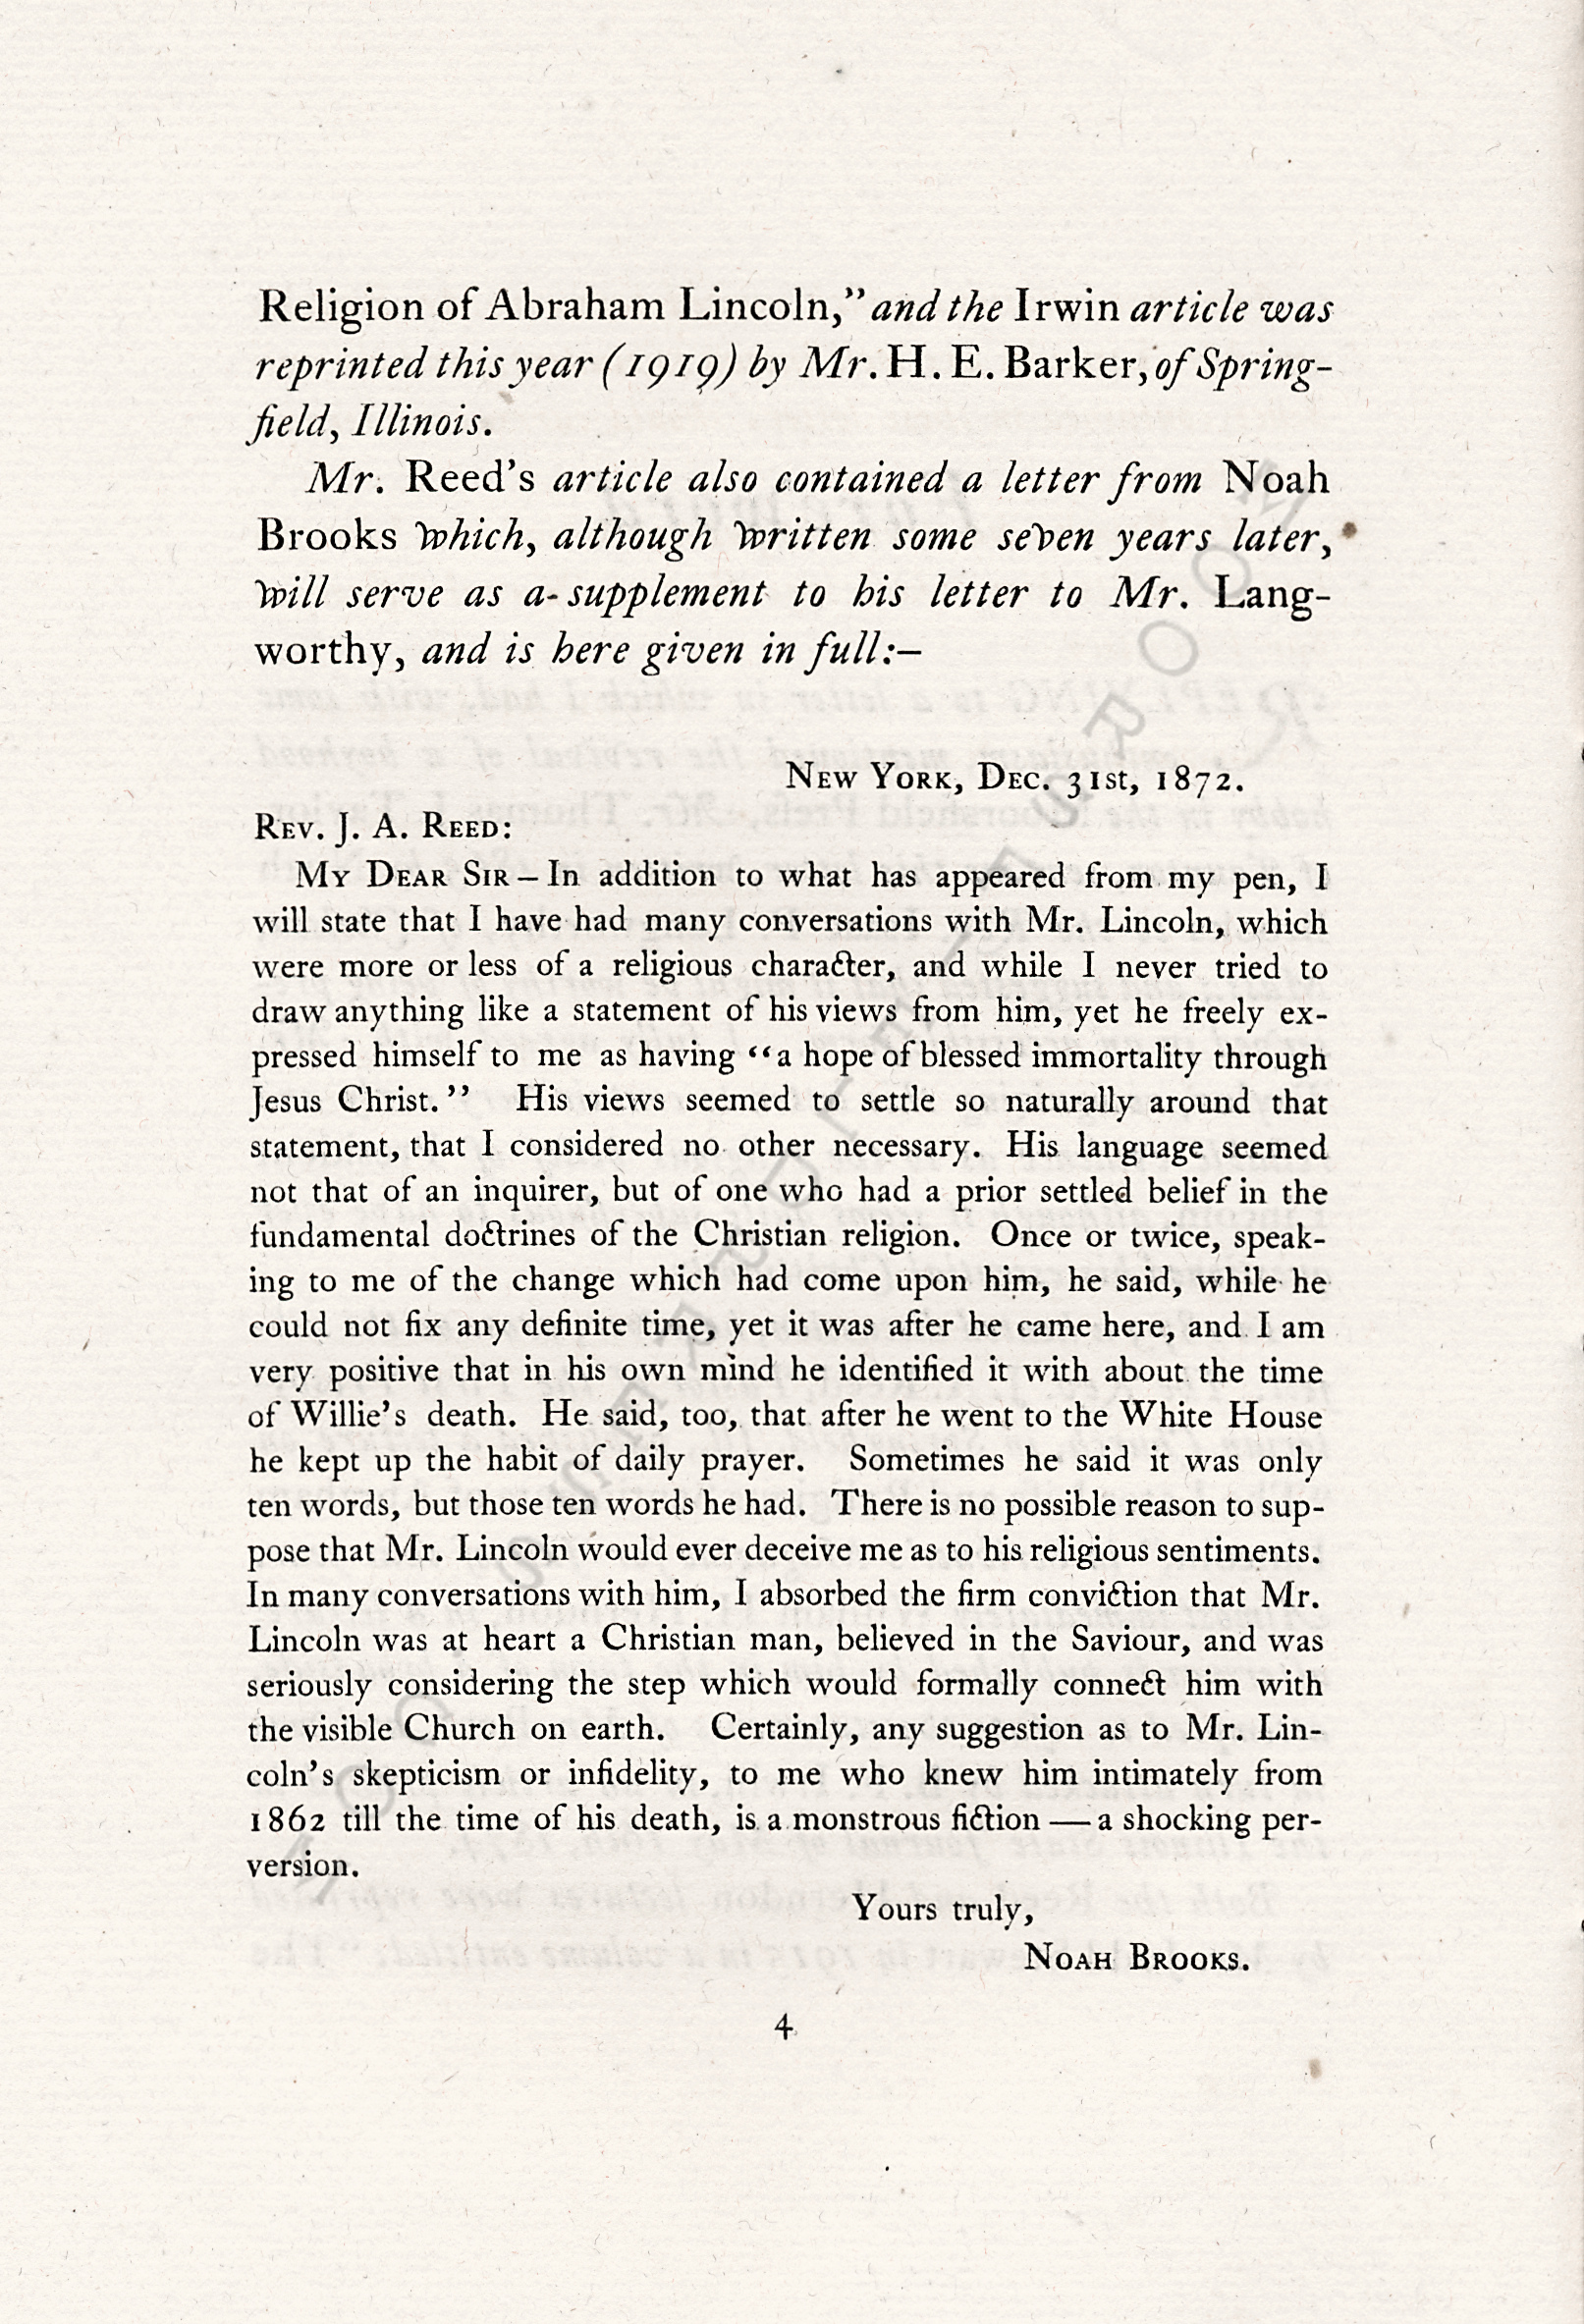 THE
                      CHARACTER AND RELIGION OF PRESIDENT LINCOLN - A
                      LETTER OF NOAH BROOKS MAY 10 1865